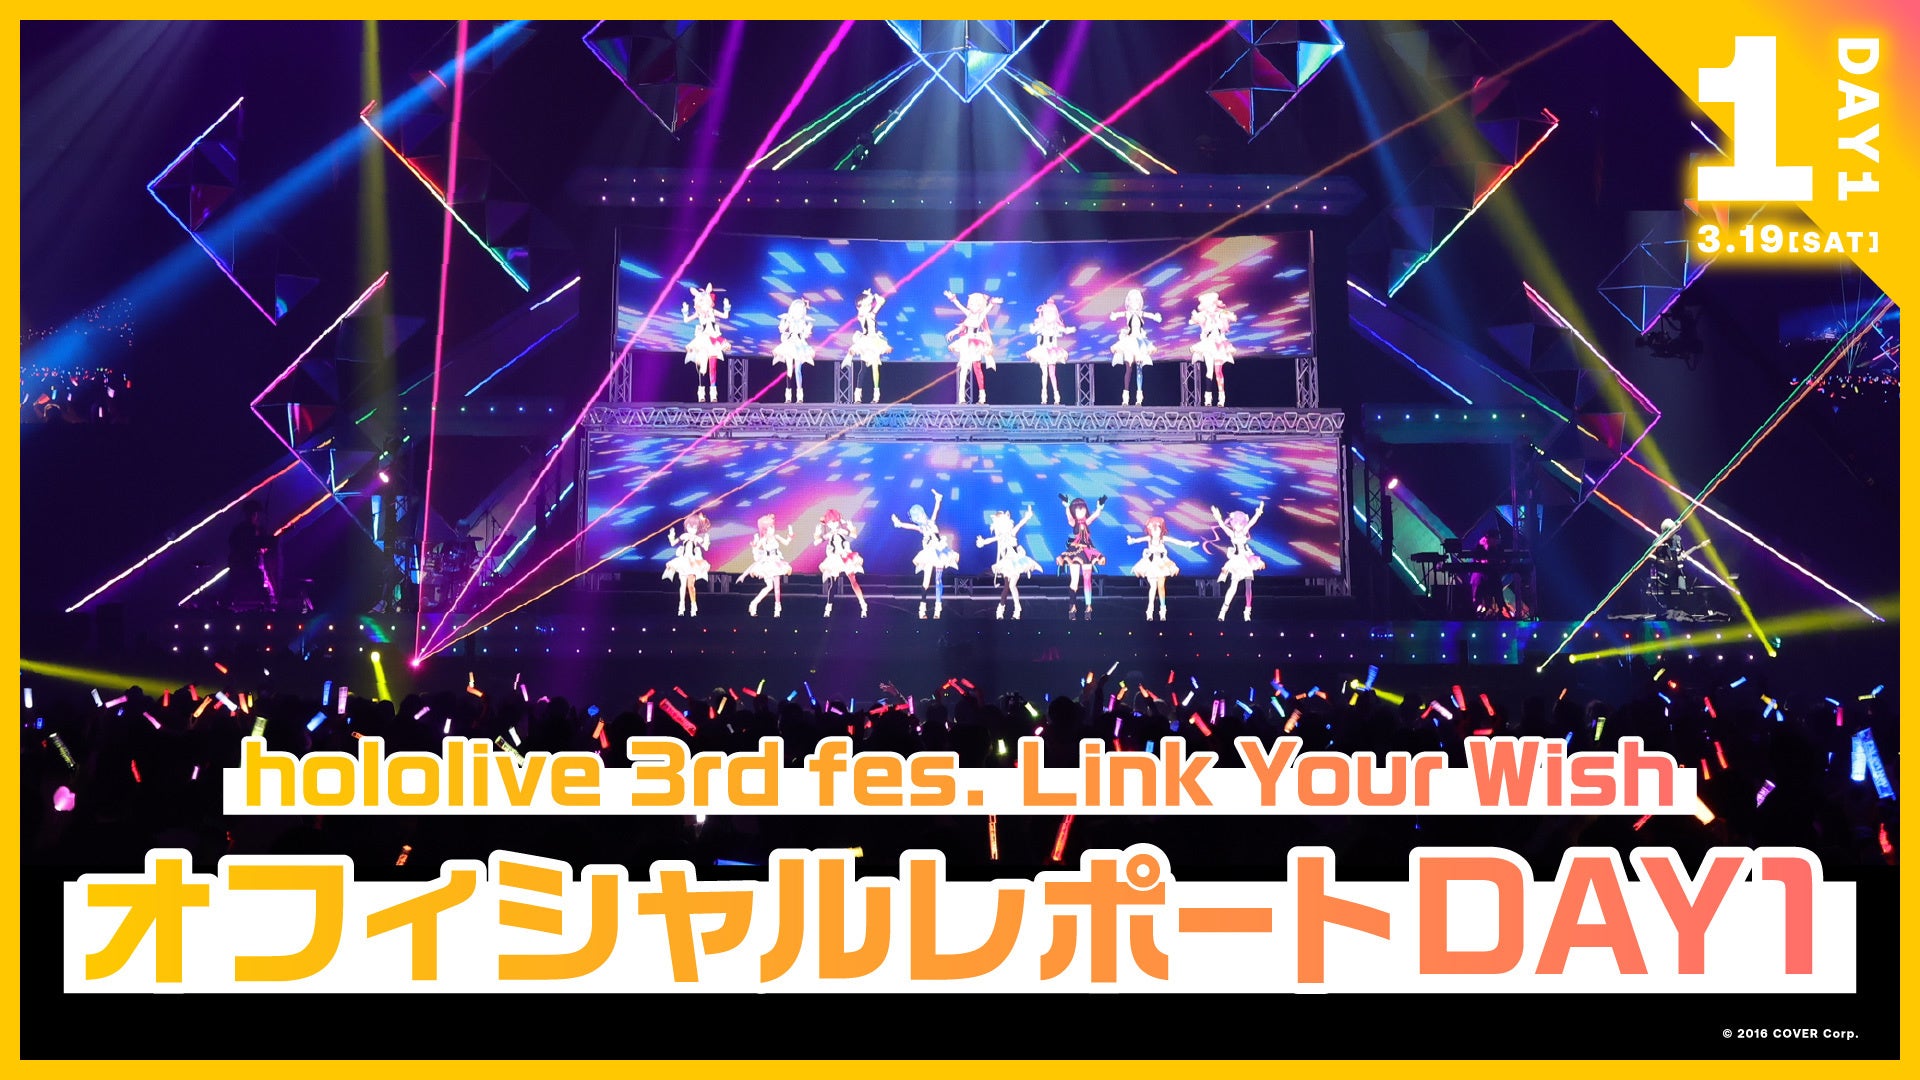 《hololive 3rd fes. Link Your Wish Supported By ヴァイスシュヴァルツ》DAY2 オフィシャルレポート公開！